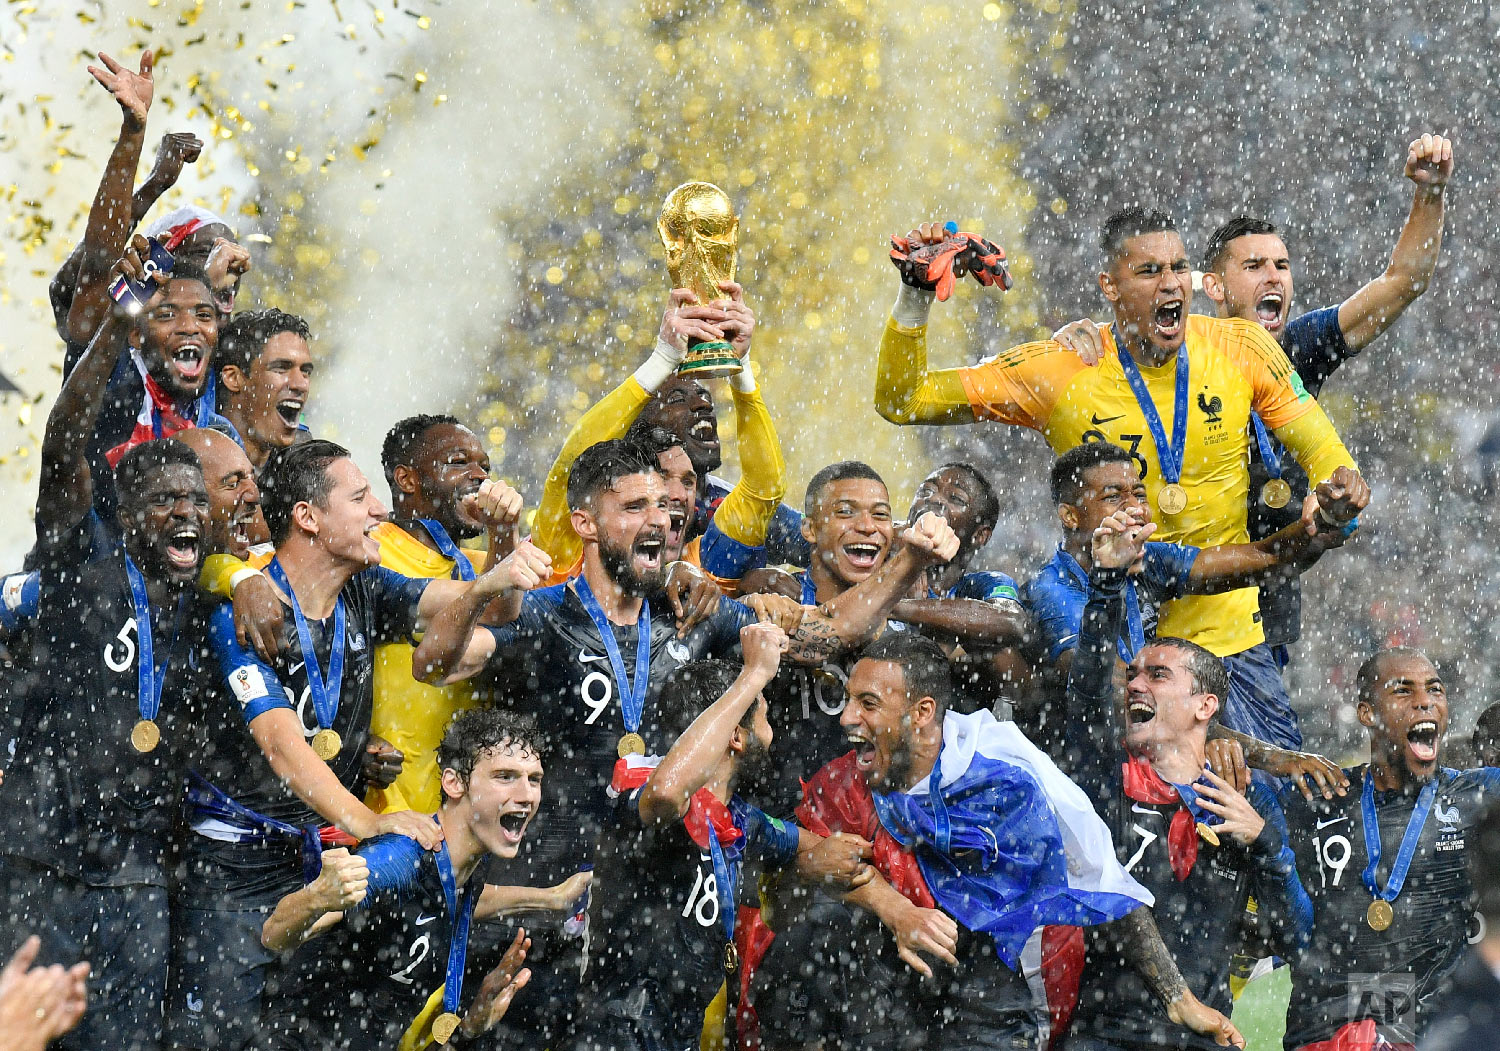  France goalkeeper Hugo Lloris lifts the trophy after France won 4-2 during the final match between France and Croatia at the 2018 soccer World Cup in the Luzhniki Stadium in Moscow, Russia on July 15, 2018. (AP Photo/Martin Meissner) 